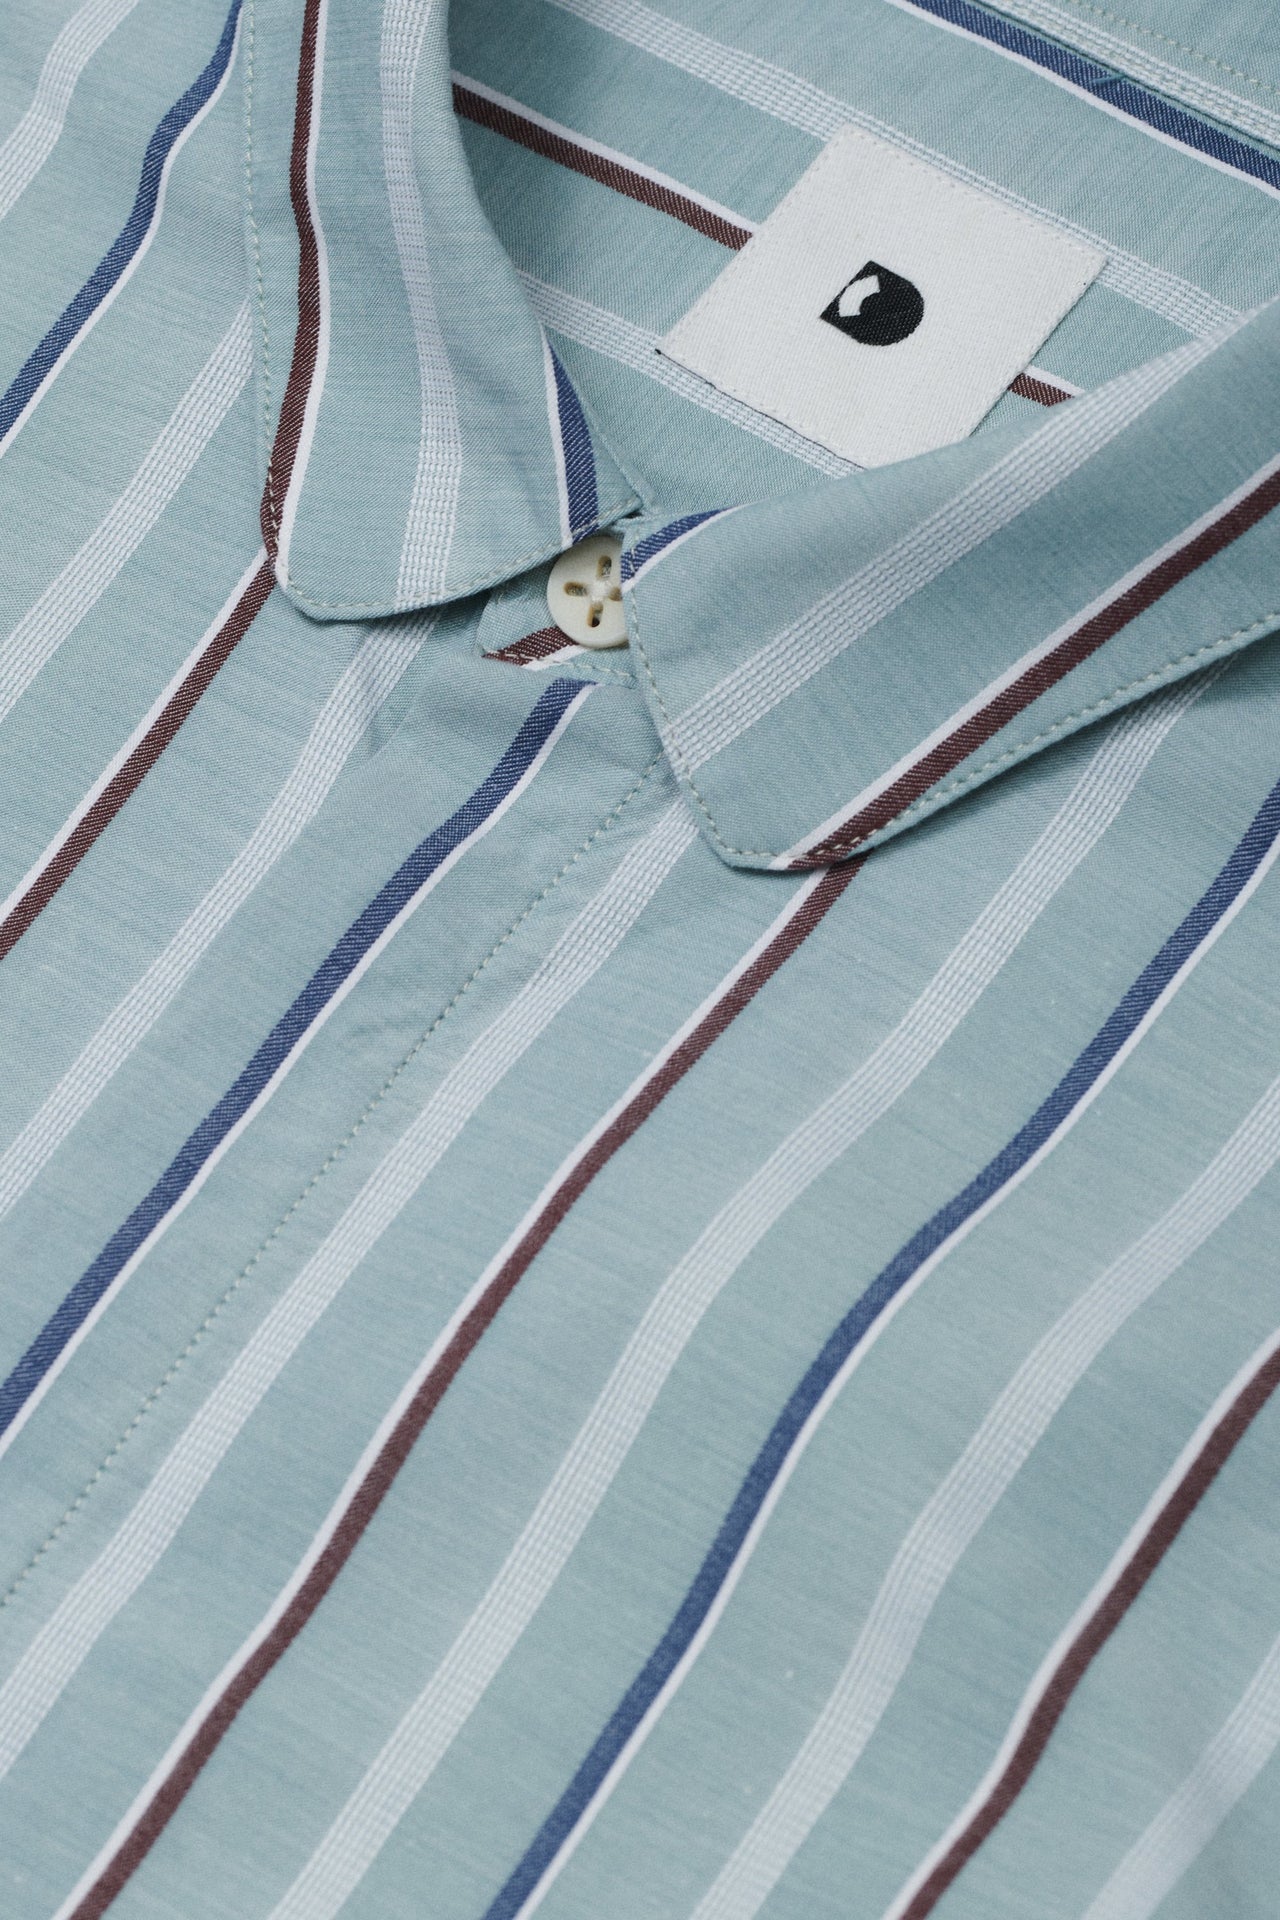 Cute Round Collar Shirt in a Mint Green, Blue, Brown and White Striped Italian Organic Cotton